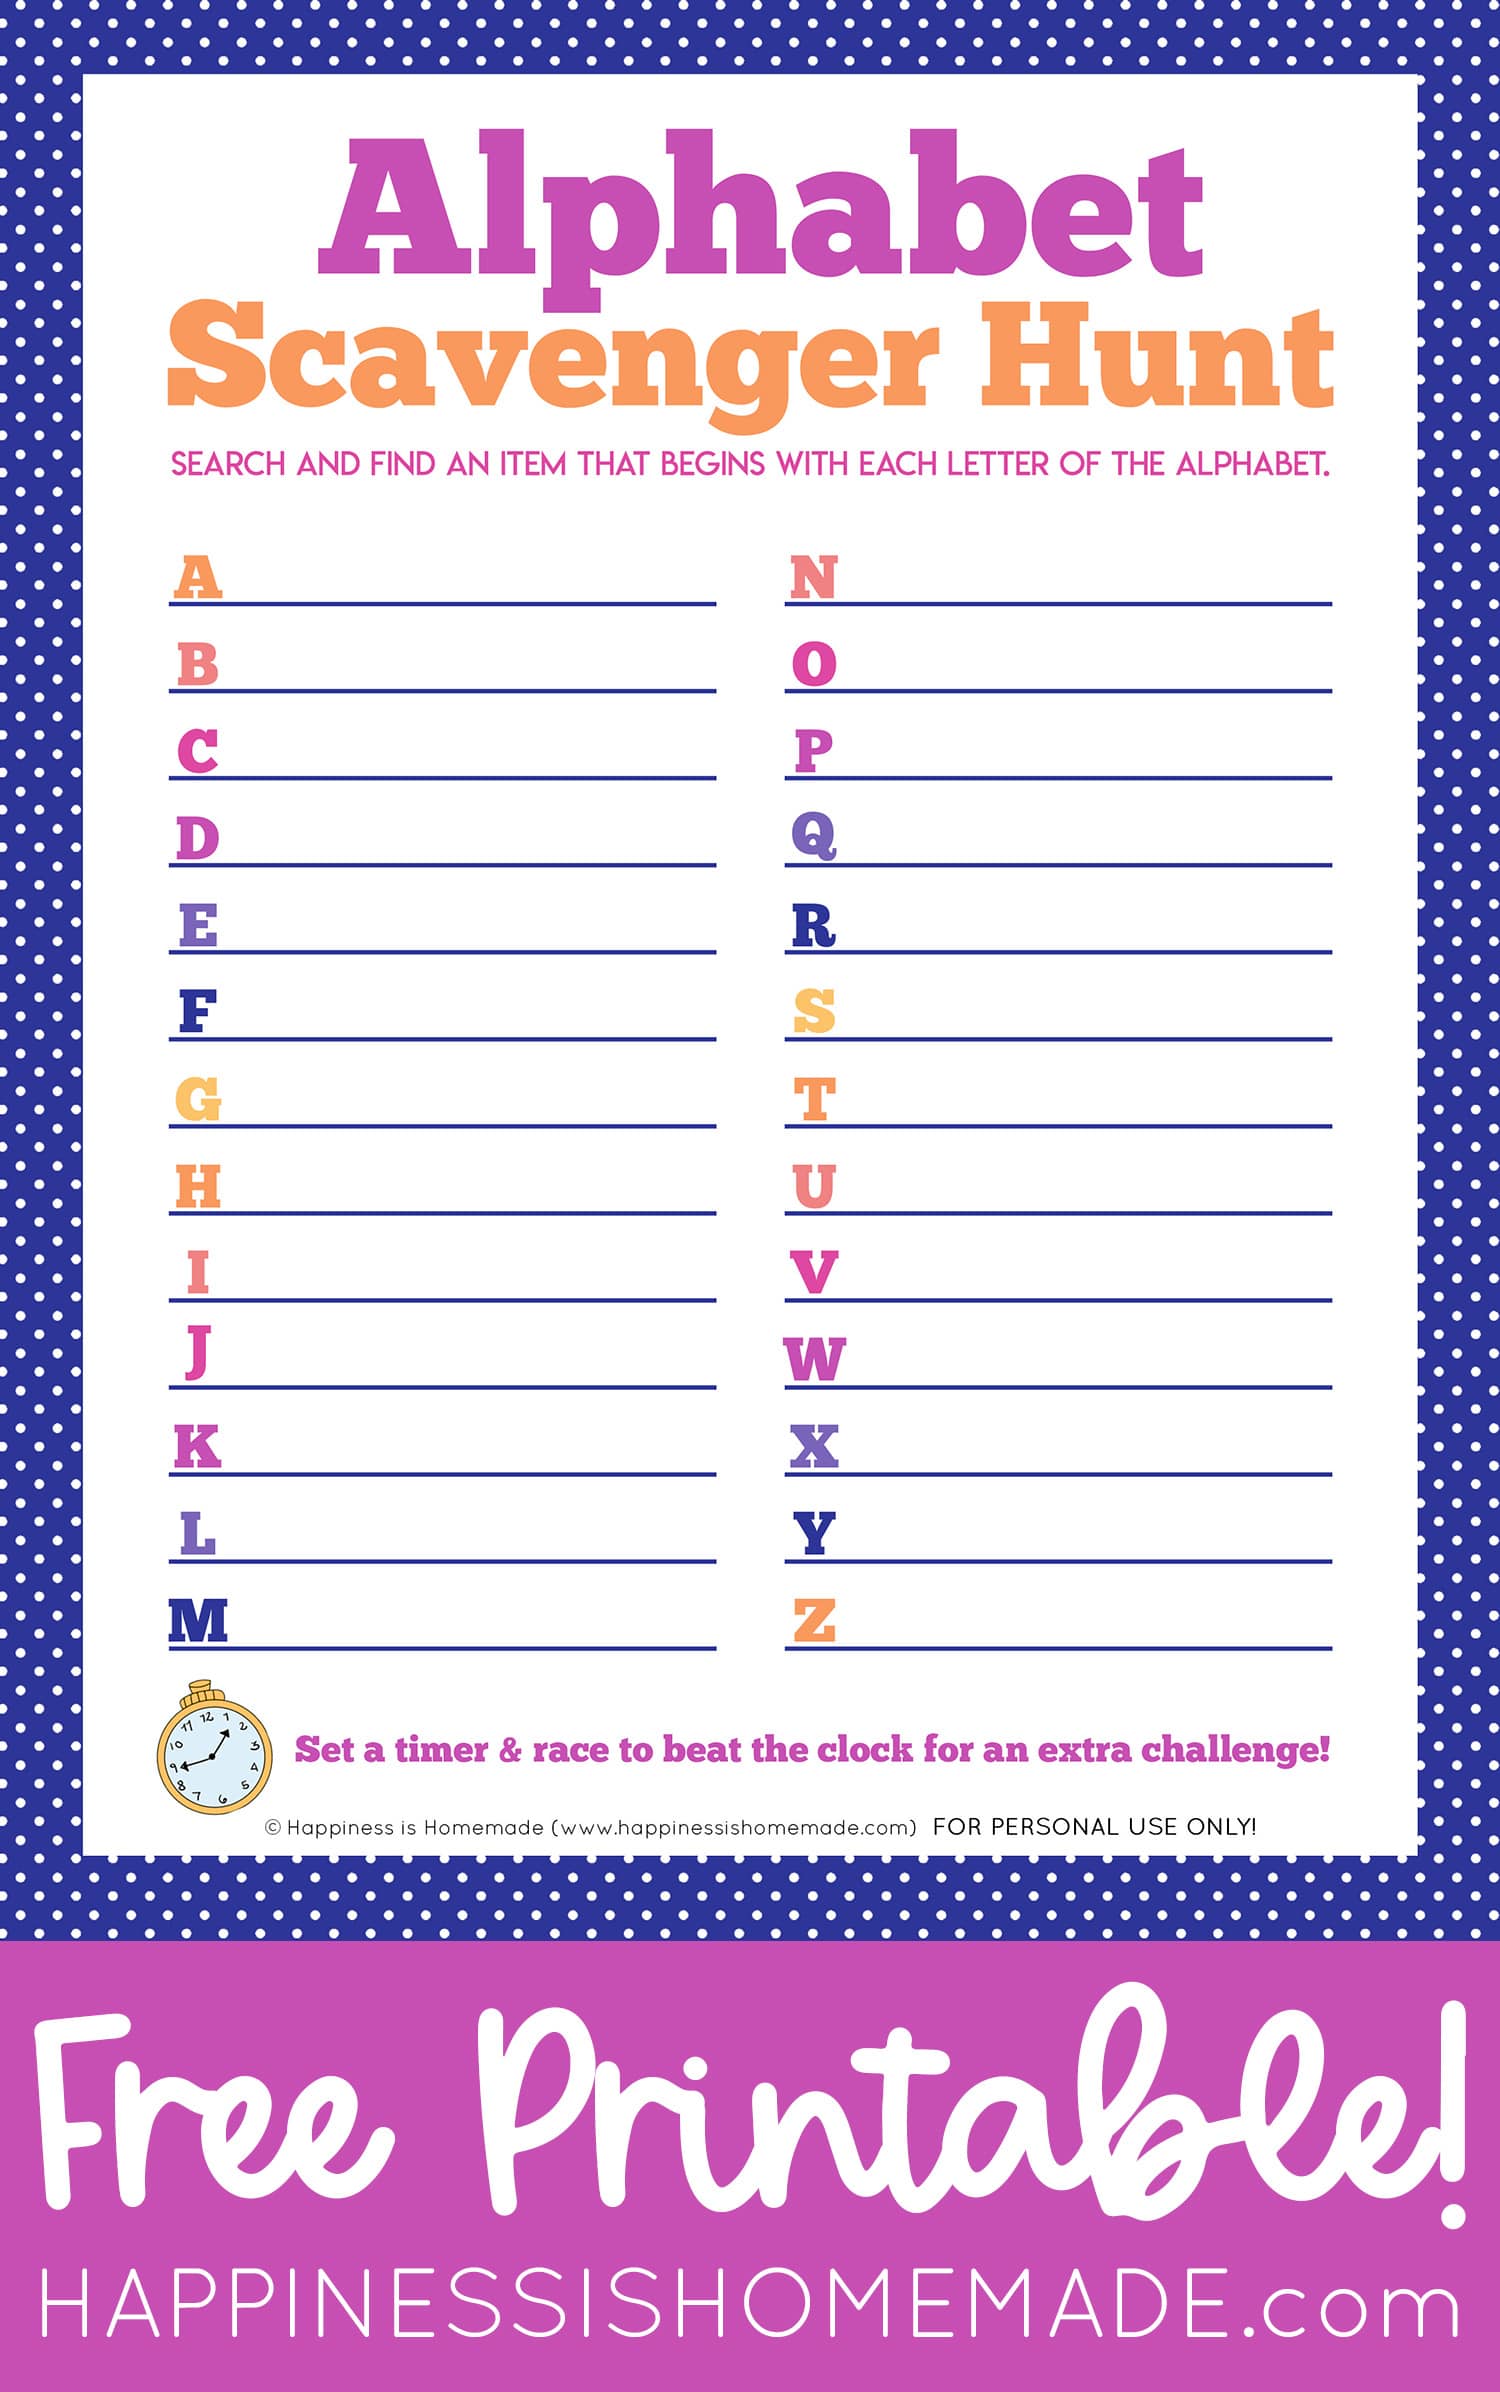 Alphabet scavenger hunt printable graphic with "Free Printable!" text